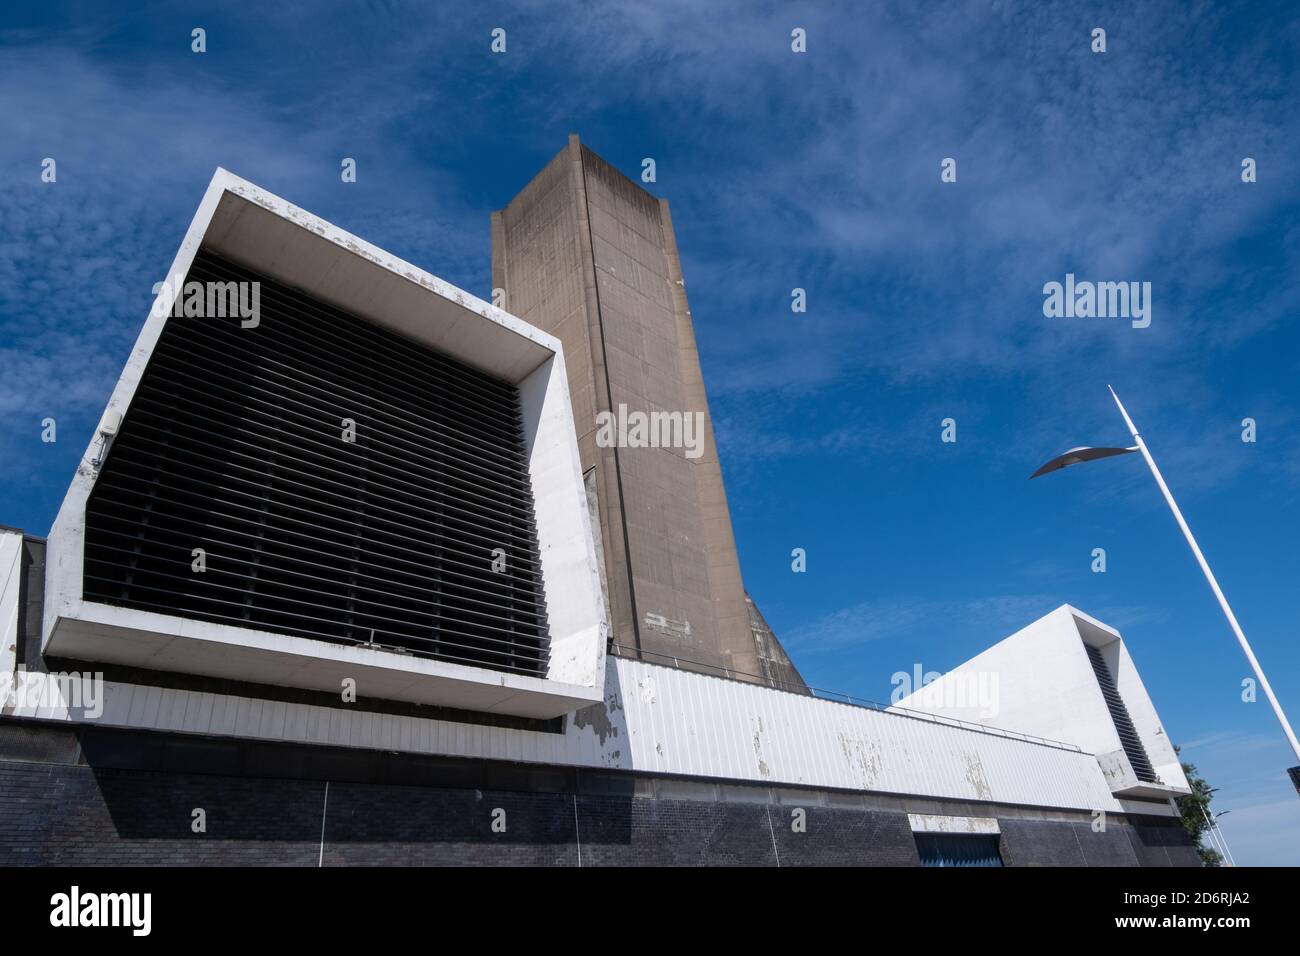 Large ventilation towers for Kingsway tunnel Seacombe Wirral July 2020 Stock Photo